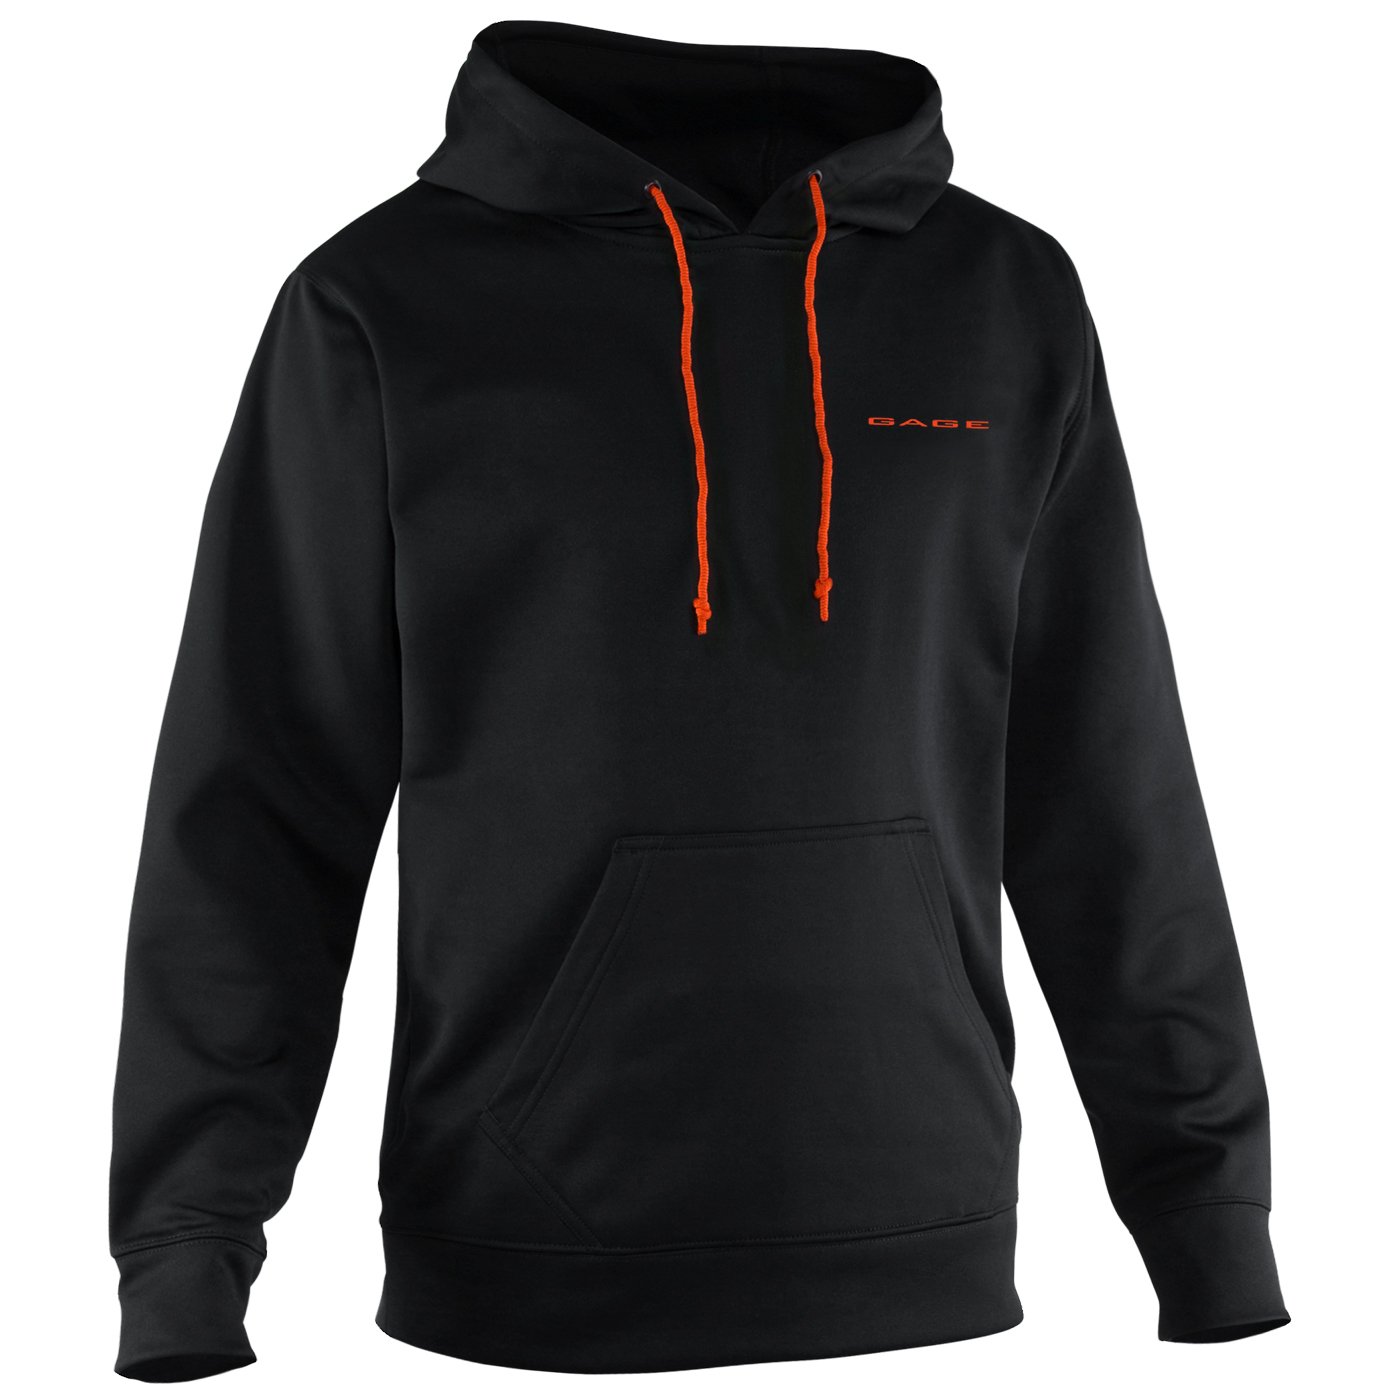 Grundens Fogbow Poly Tech Hooded Fishing Sweatshirt - Black - Size Small